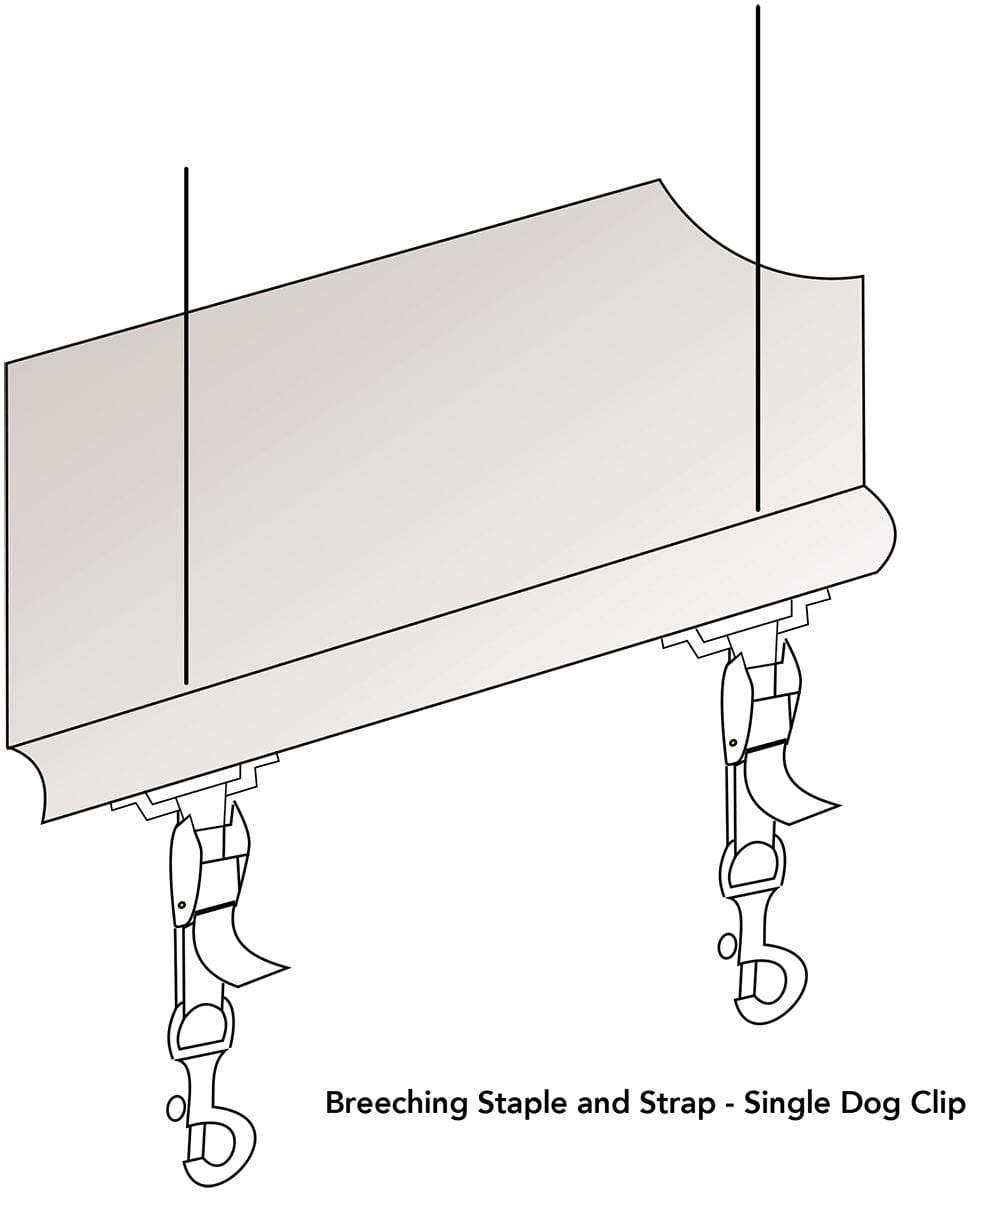 Straight Drop Awning - Breeching Staple and Strap - Single Dog Clip - Diagram